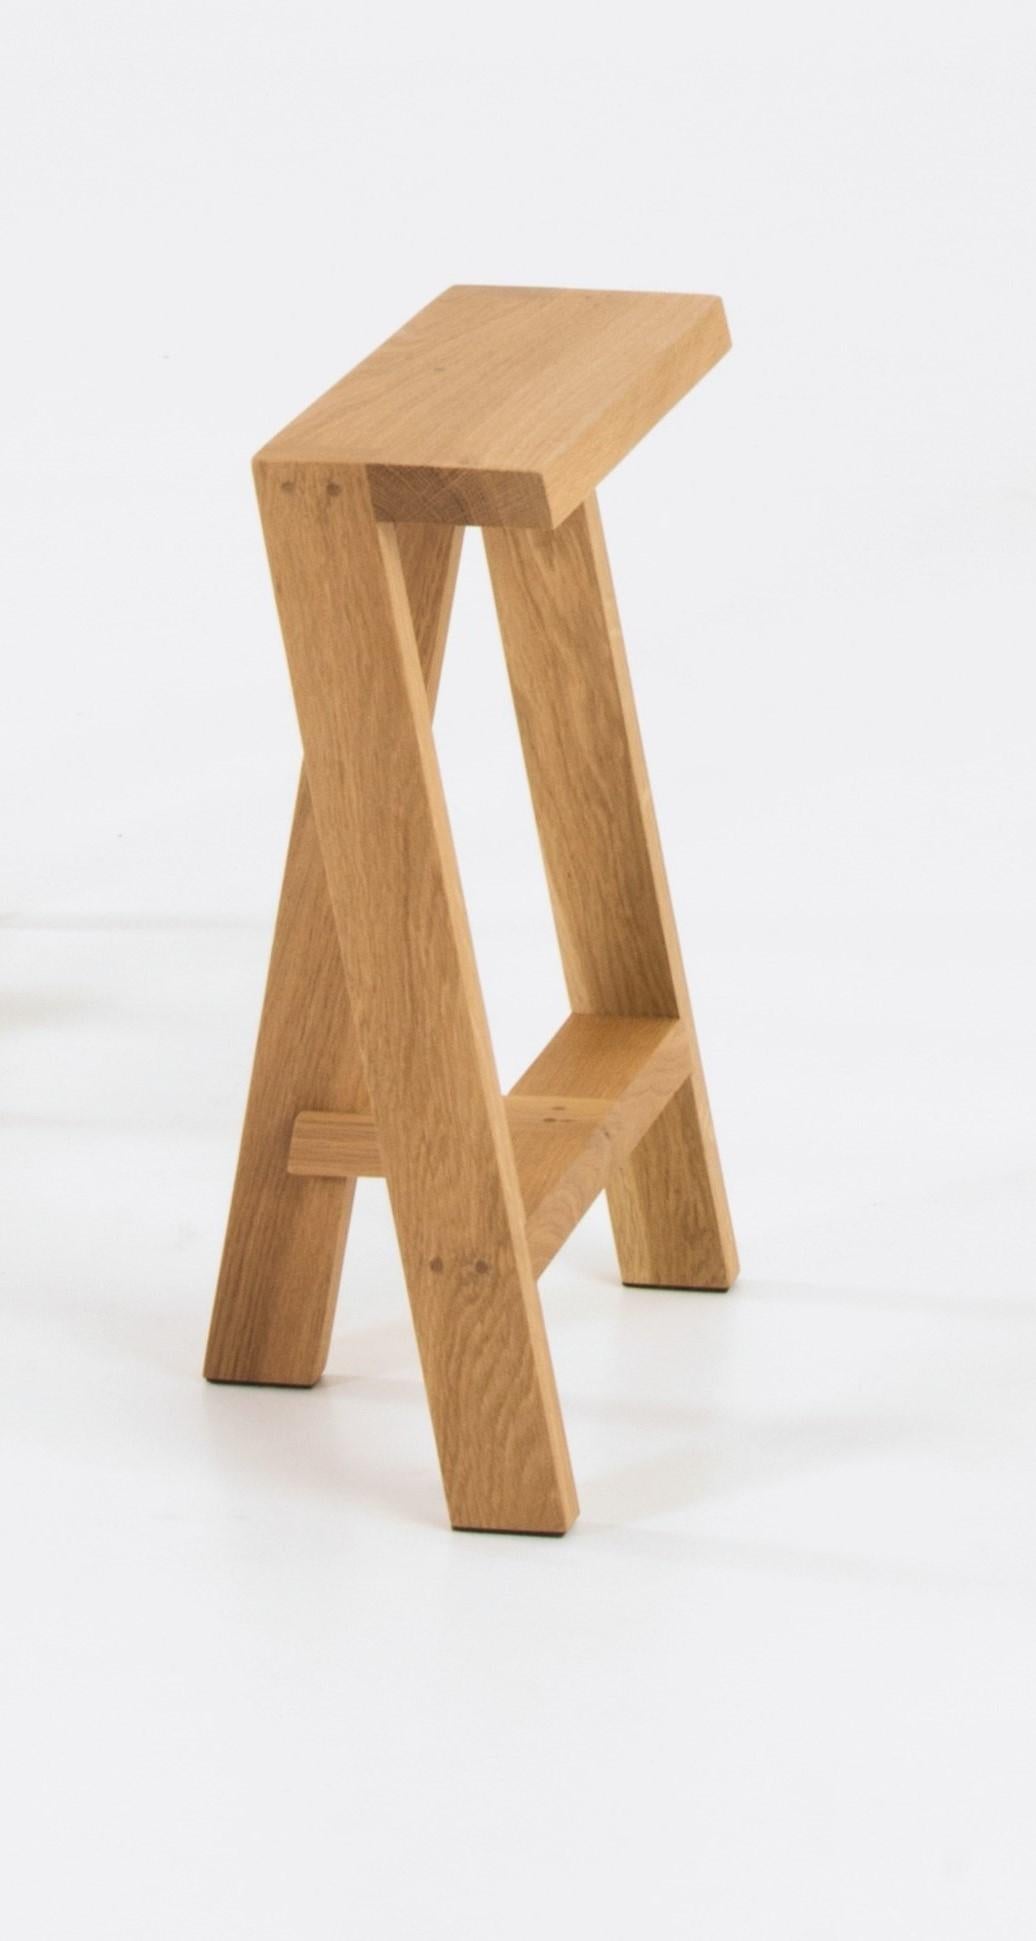 Small Pausa oak stool by Pierre-Emmanuel Vandeputte
Dimensions: D 20 x W 35 x H 45 cm
Materials: oak wood
Available in burnt oak version and in 3 sizes.

Pausa is a series of stools; 45cm, 65cm, or 80cm of assembled oak pieces. 
The narrow